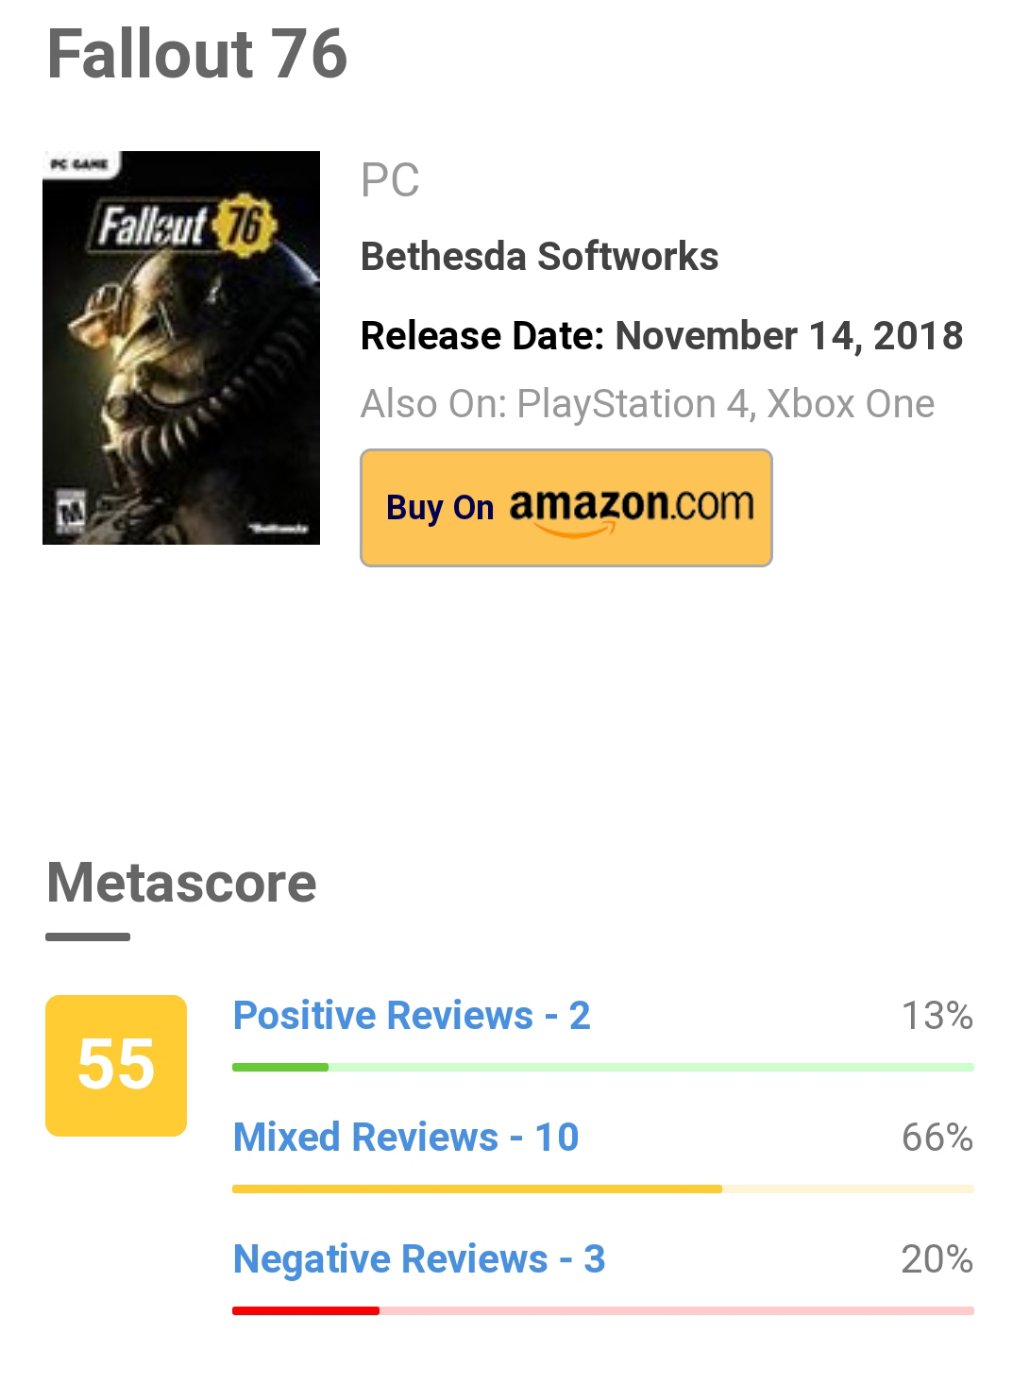 screwy.bsky.social on X: "The highest rated version of Fallout 76 has  beaten out Brotherhood of Steel as the lowest ranking game in the series on  Metacritic. Yikes. https://t.co/HKHs8tSTCJ" / X